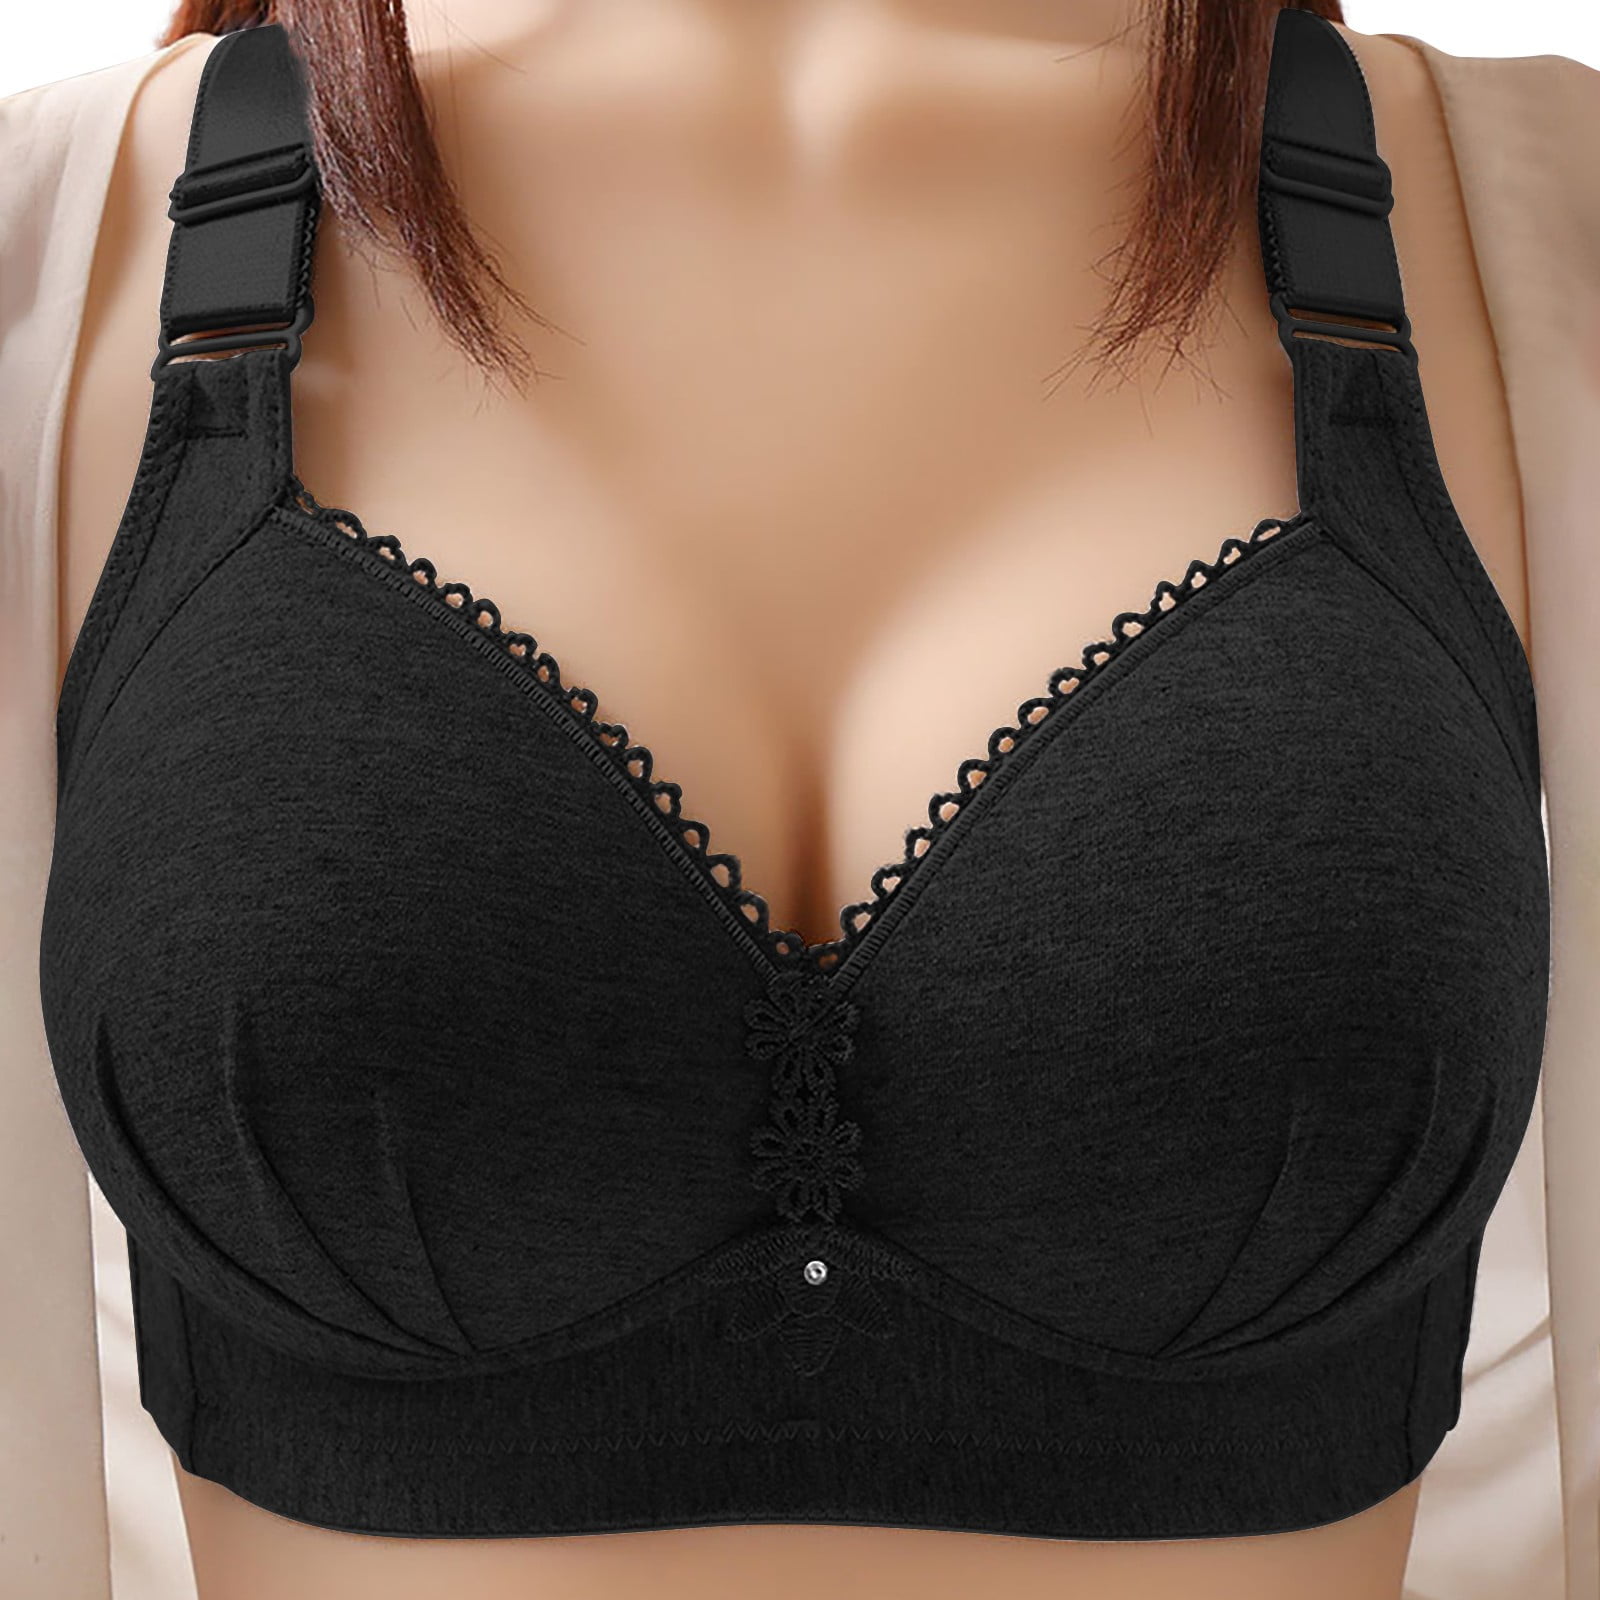 Back Smoothing Bras for Women Button Shapin Adjustable Shoulder Strap  Shapermint Bra for Womens Wirefree Black 42